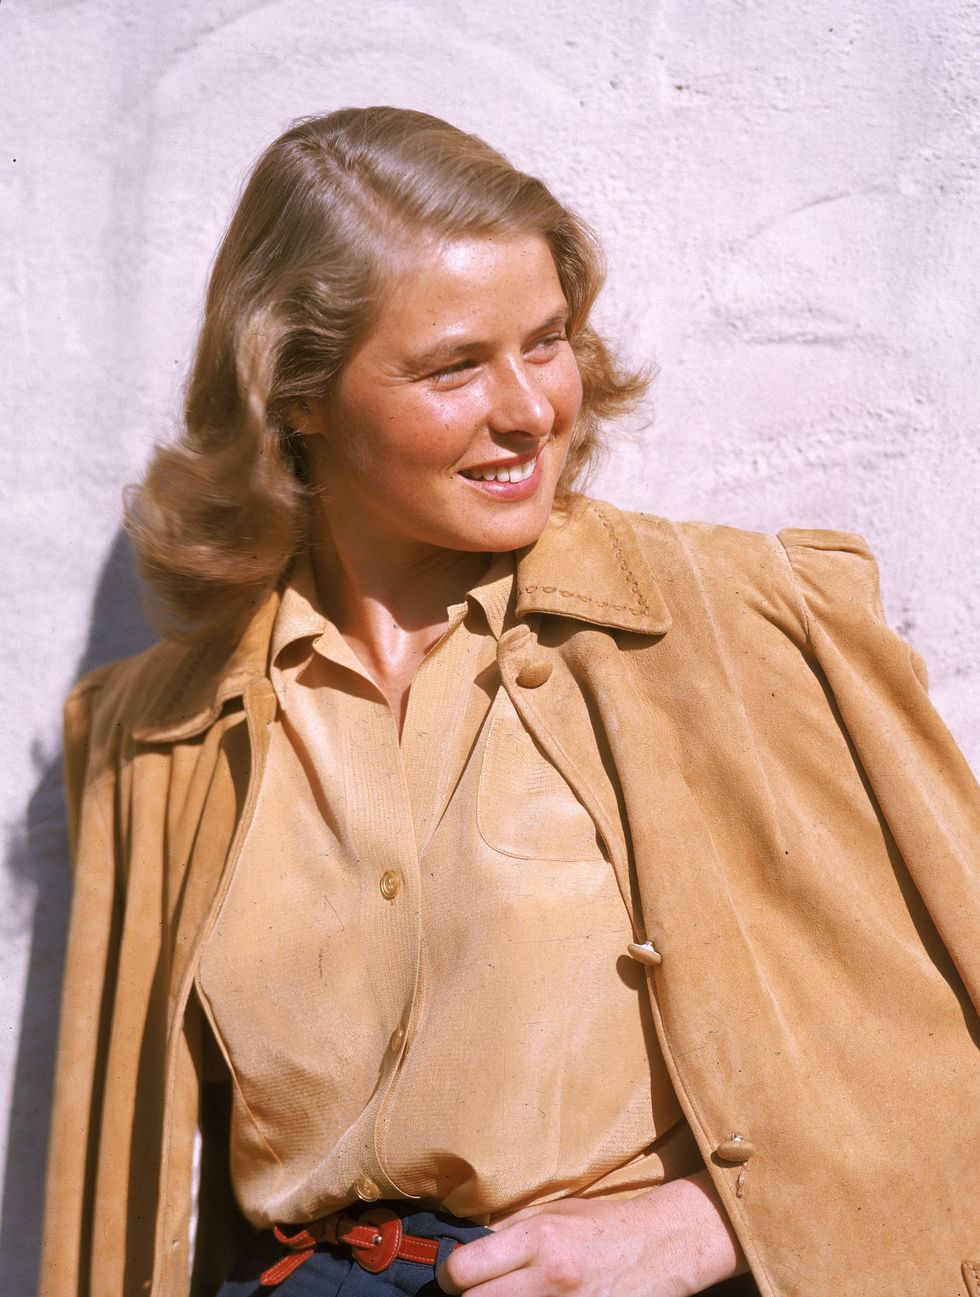 swedish born actor ingrid bergman 1915   1982 smiles as she poses outdoors, wearing a tan leather jacket, circa 1945 photo by hulton archivegetty images